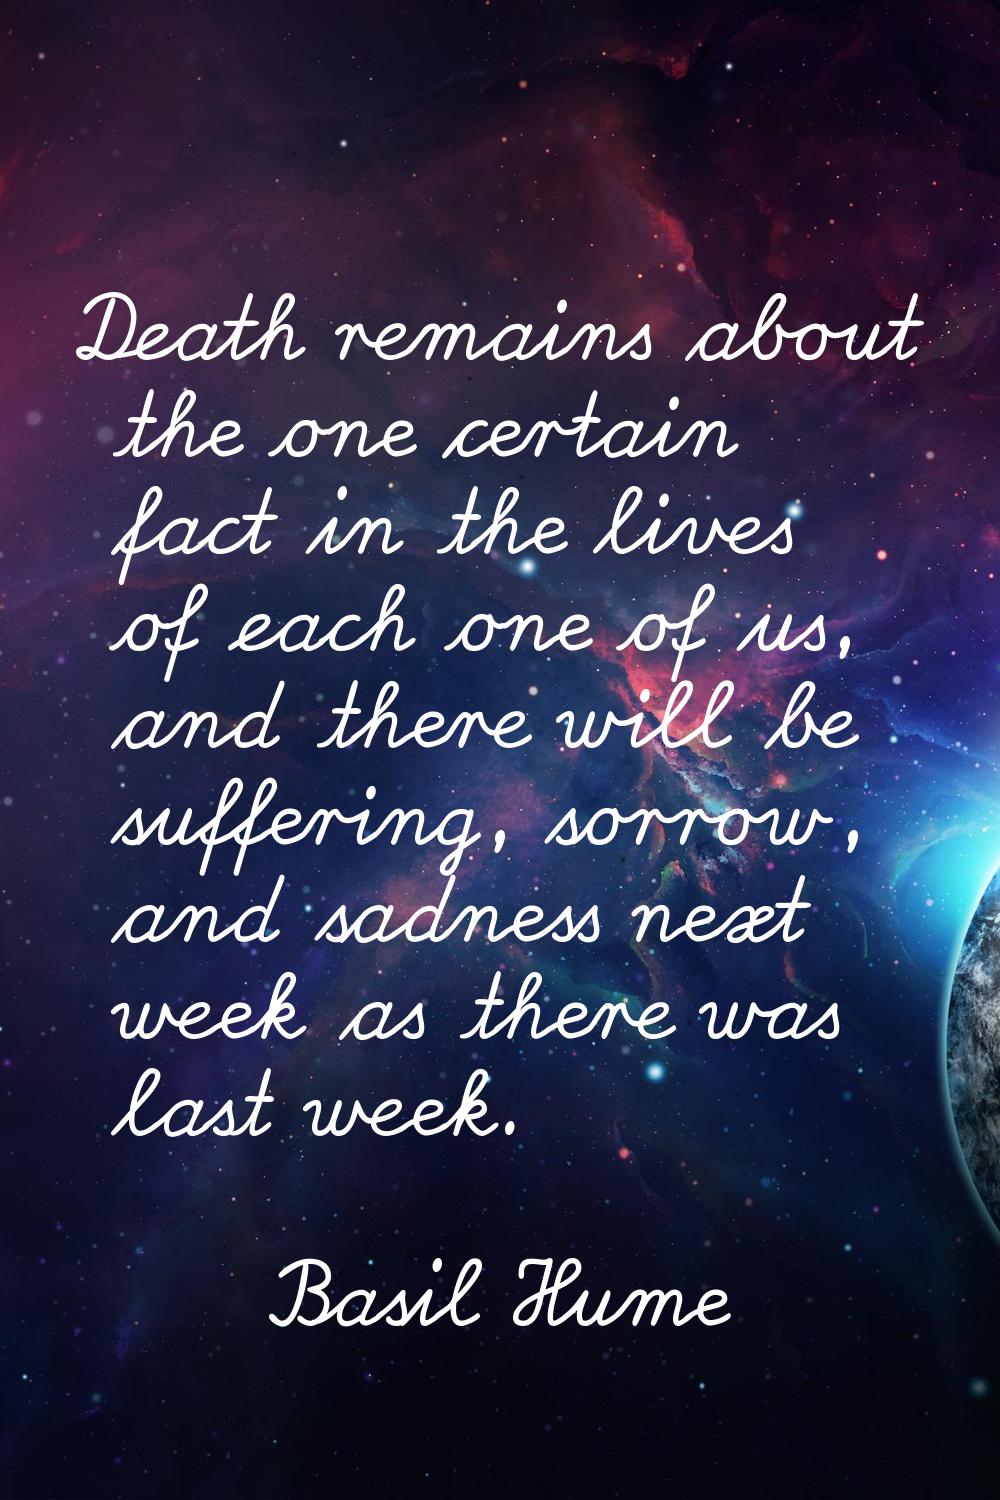 Death remains about the one certain fact in the lives of each one of us, and there will be sufferin